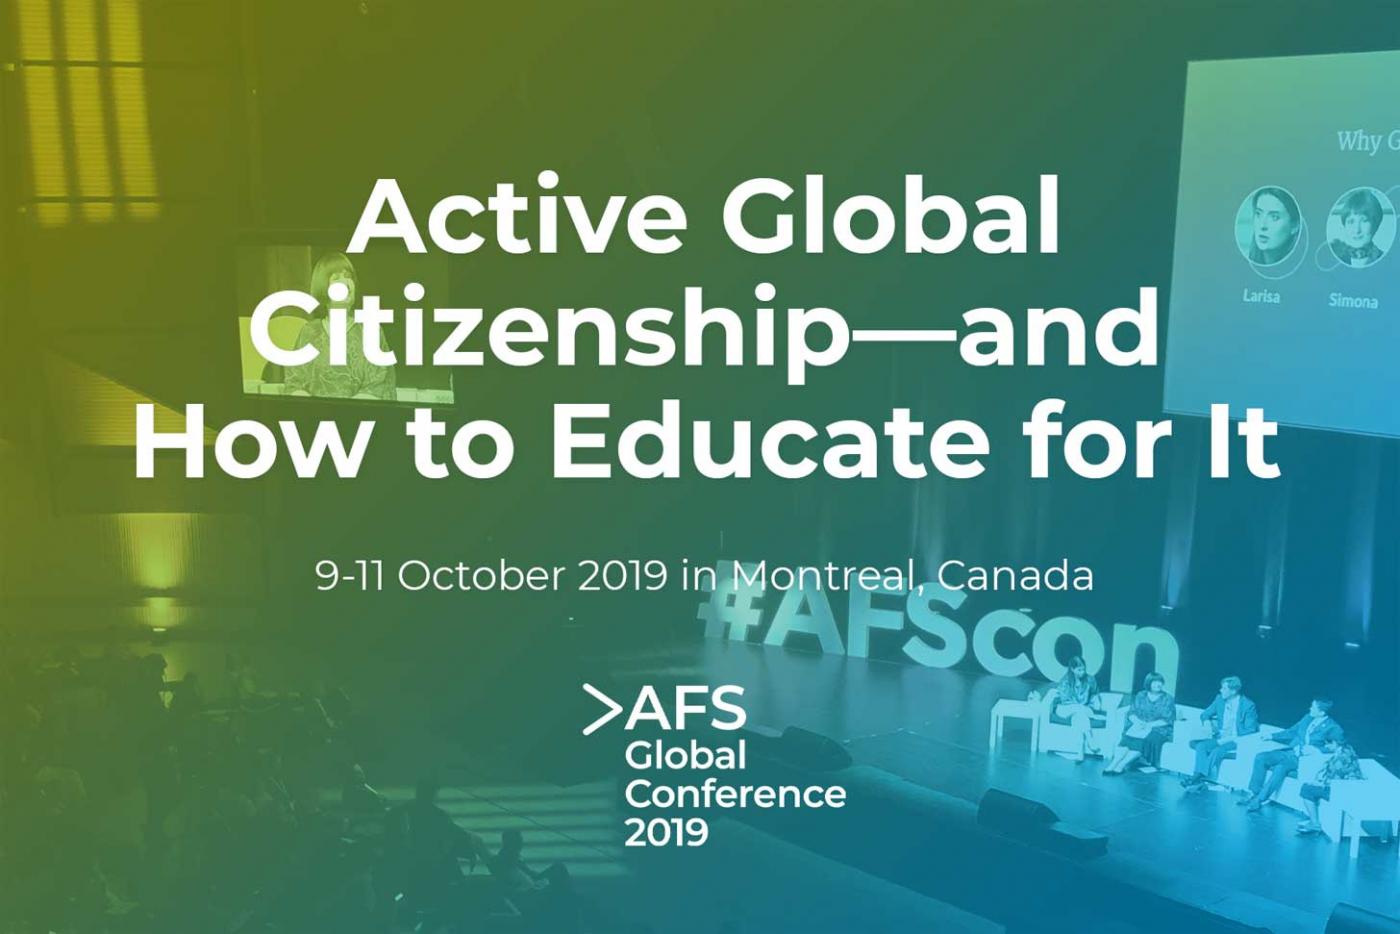 AFS Global Conference 2019: Active Global Citizenship and How to Educate For It; October 9-11, Montreal